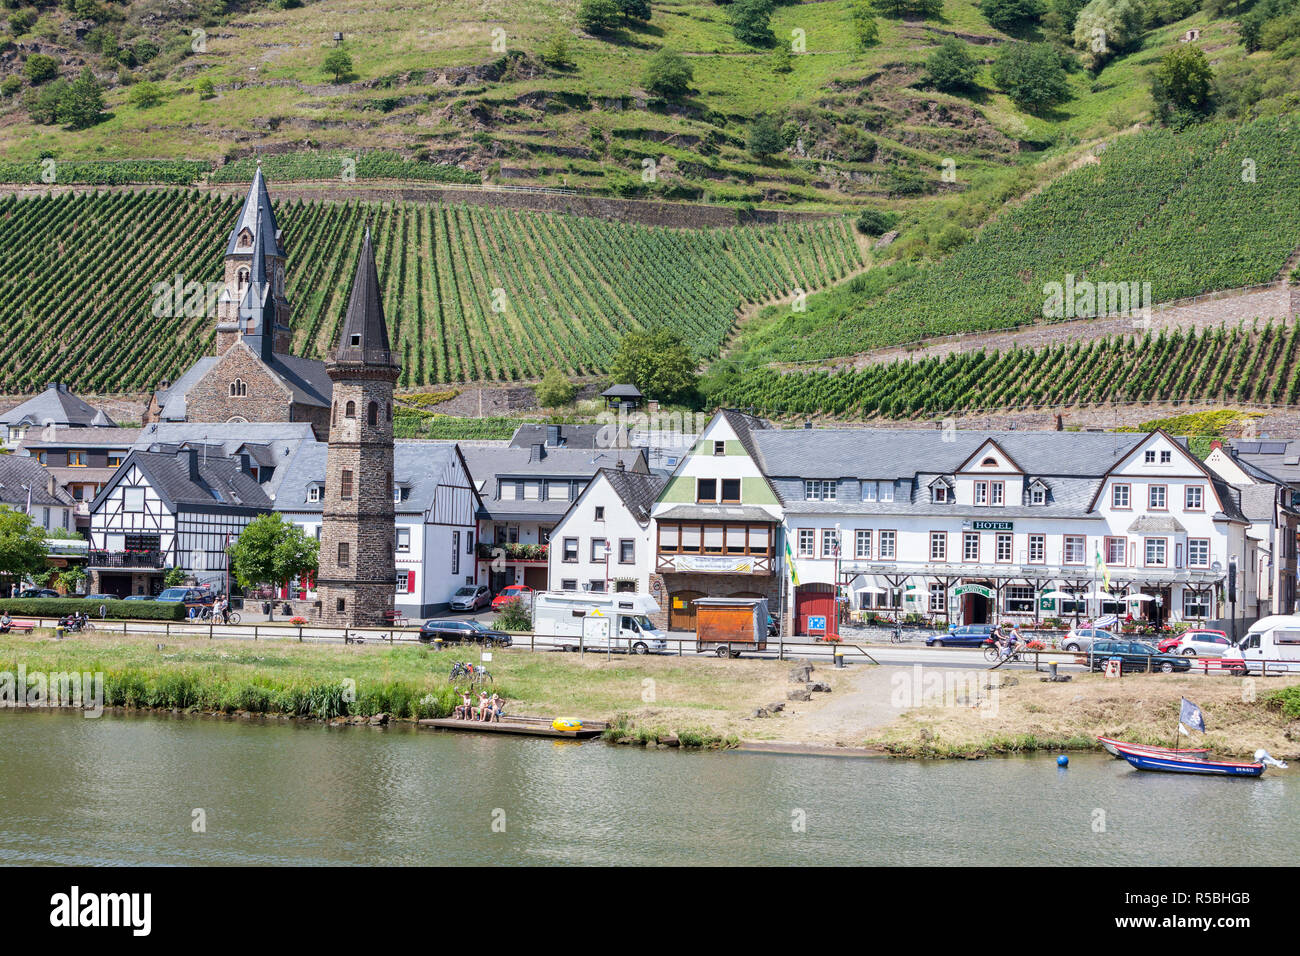 Hatzenport, Germany, on the Moselle.  Vineyards on Hillsides behind the Town. Stock Photo